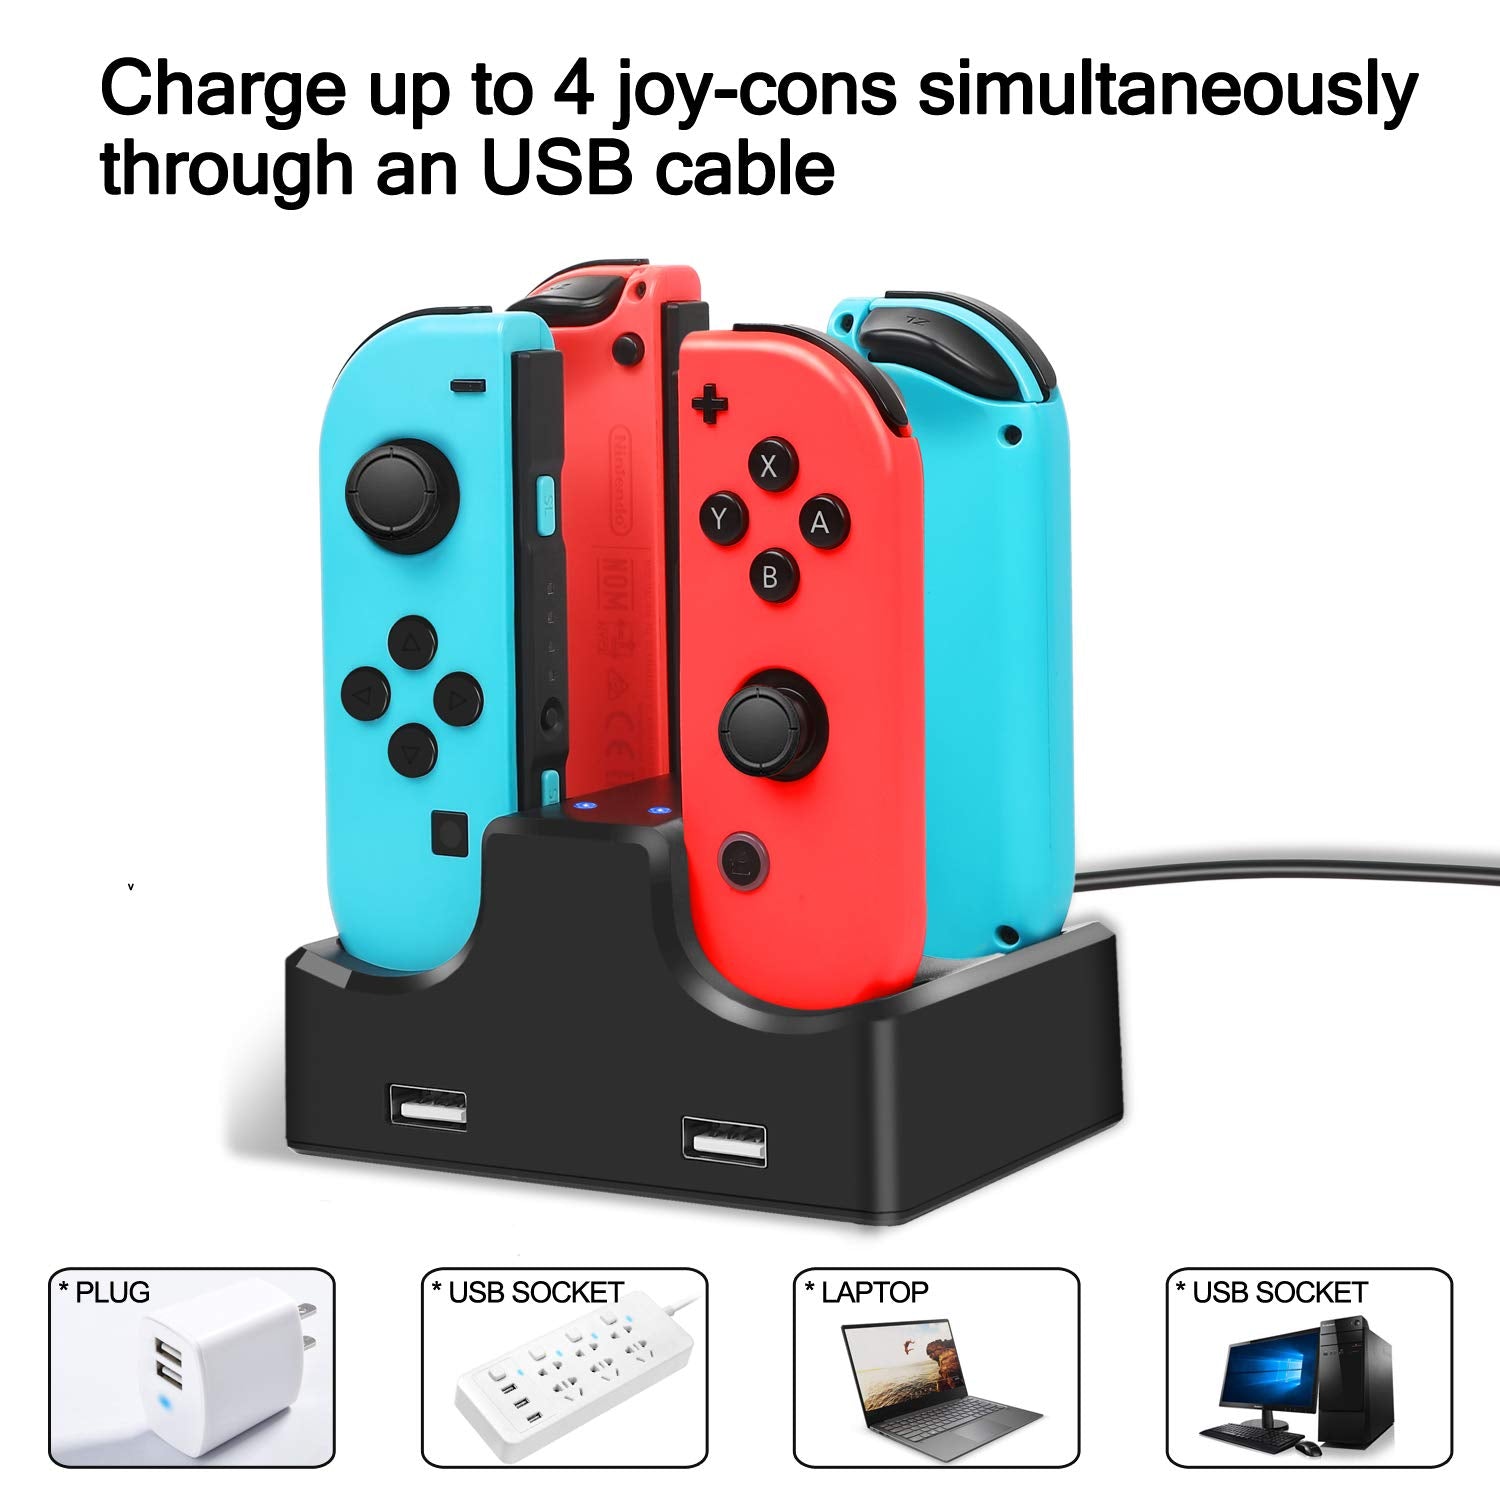 Switch Accessories Bundle for Nintendo Switch, Kit with Carrying Case, Screen Protector,Charging Dock,Compact Playstand,Protective Case,Game Case,Joystick Cap,Grip and Steering Wheel (18-in-1)